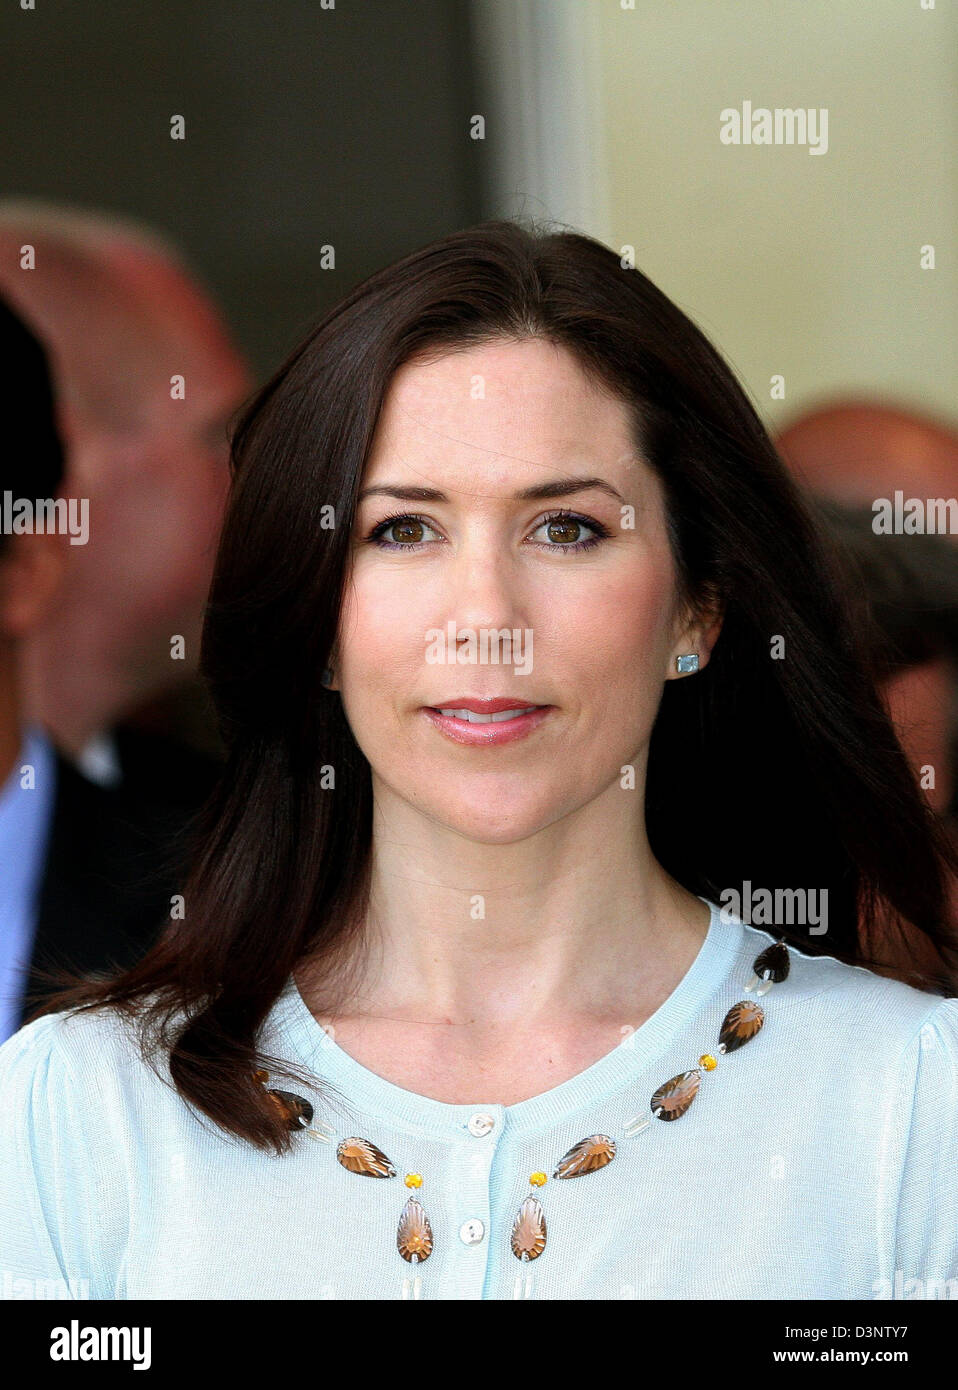 crown-princess-mary-of-denmark-arrives-to-the-musee-dart-moderne-grand-D3NTY7.jpg